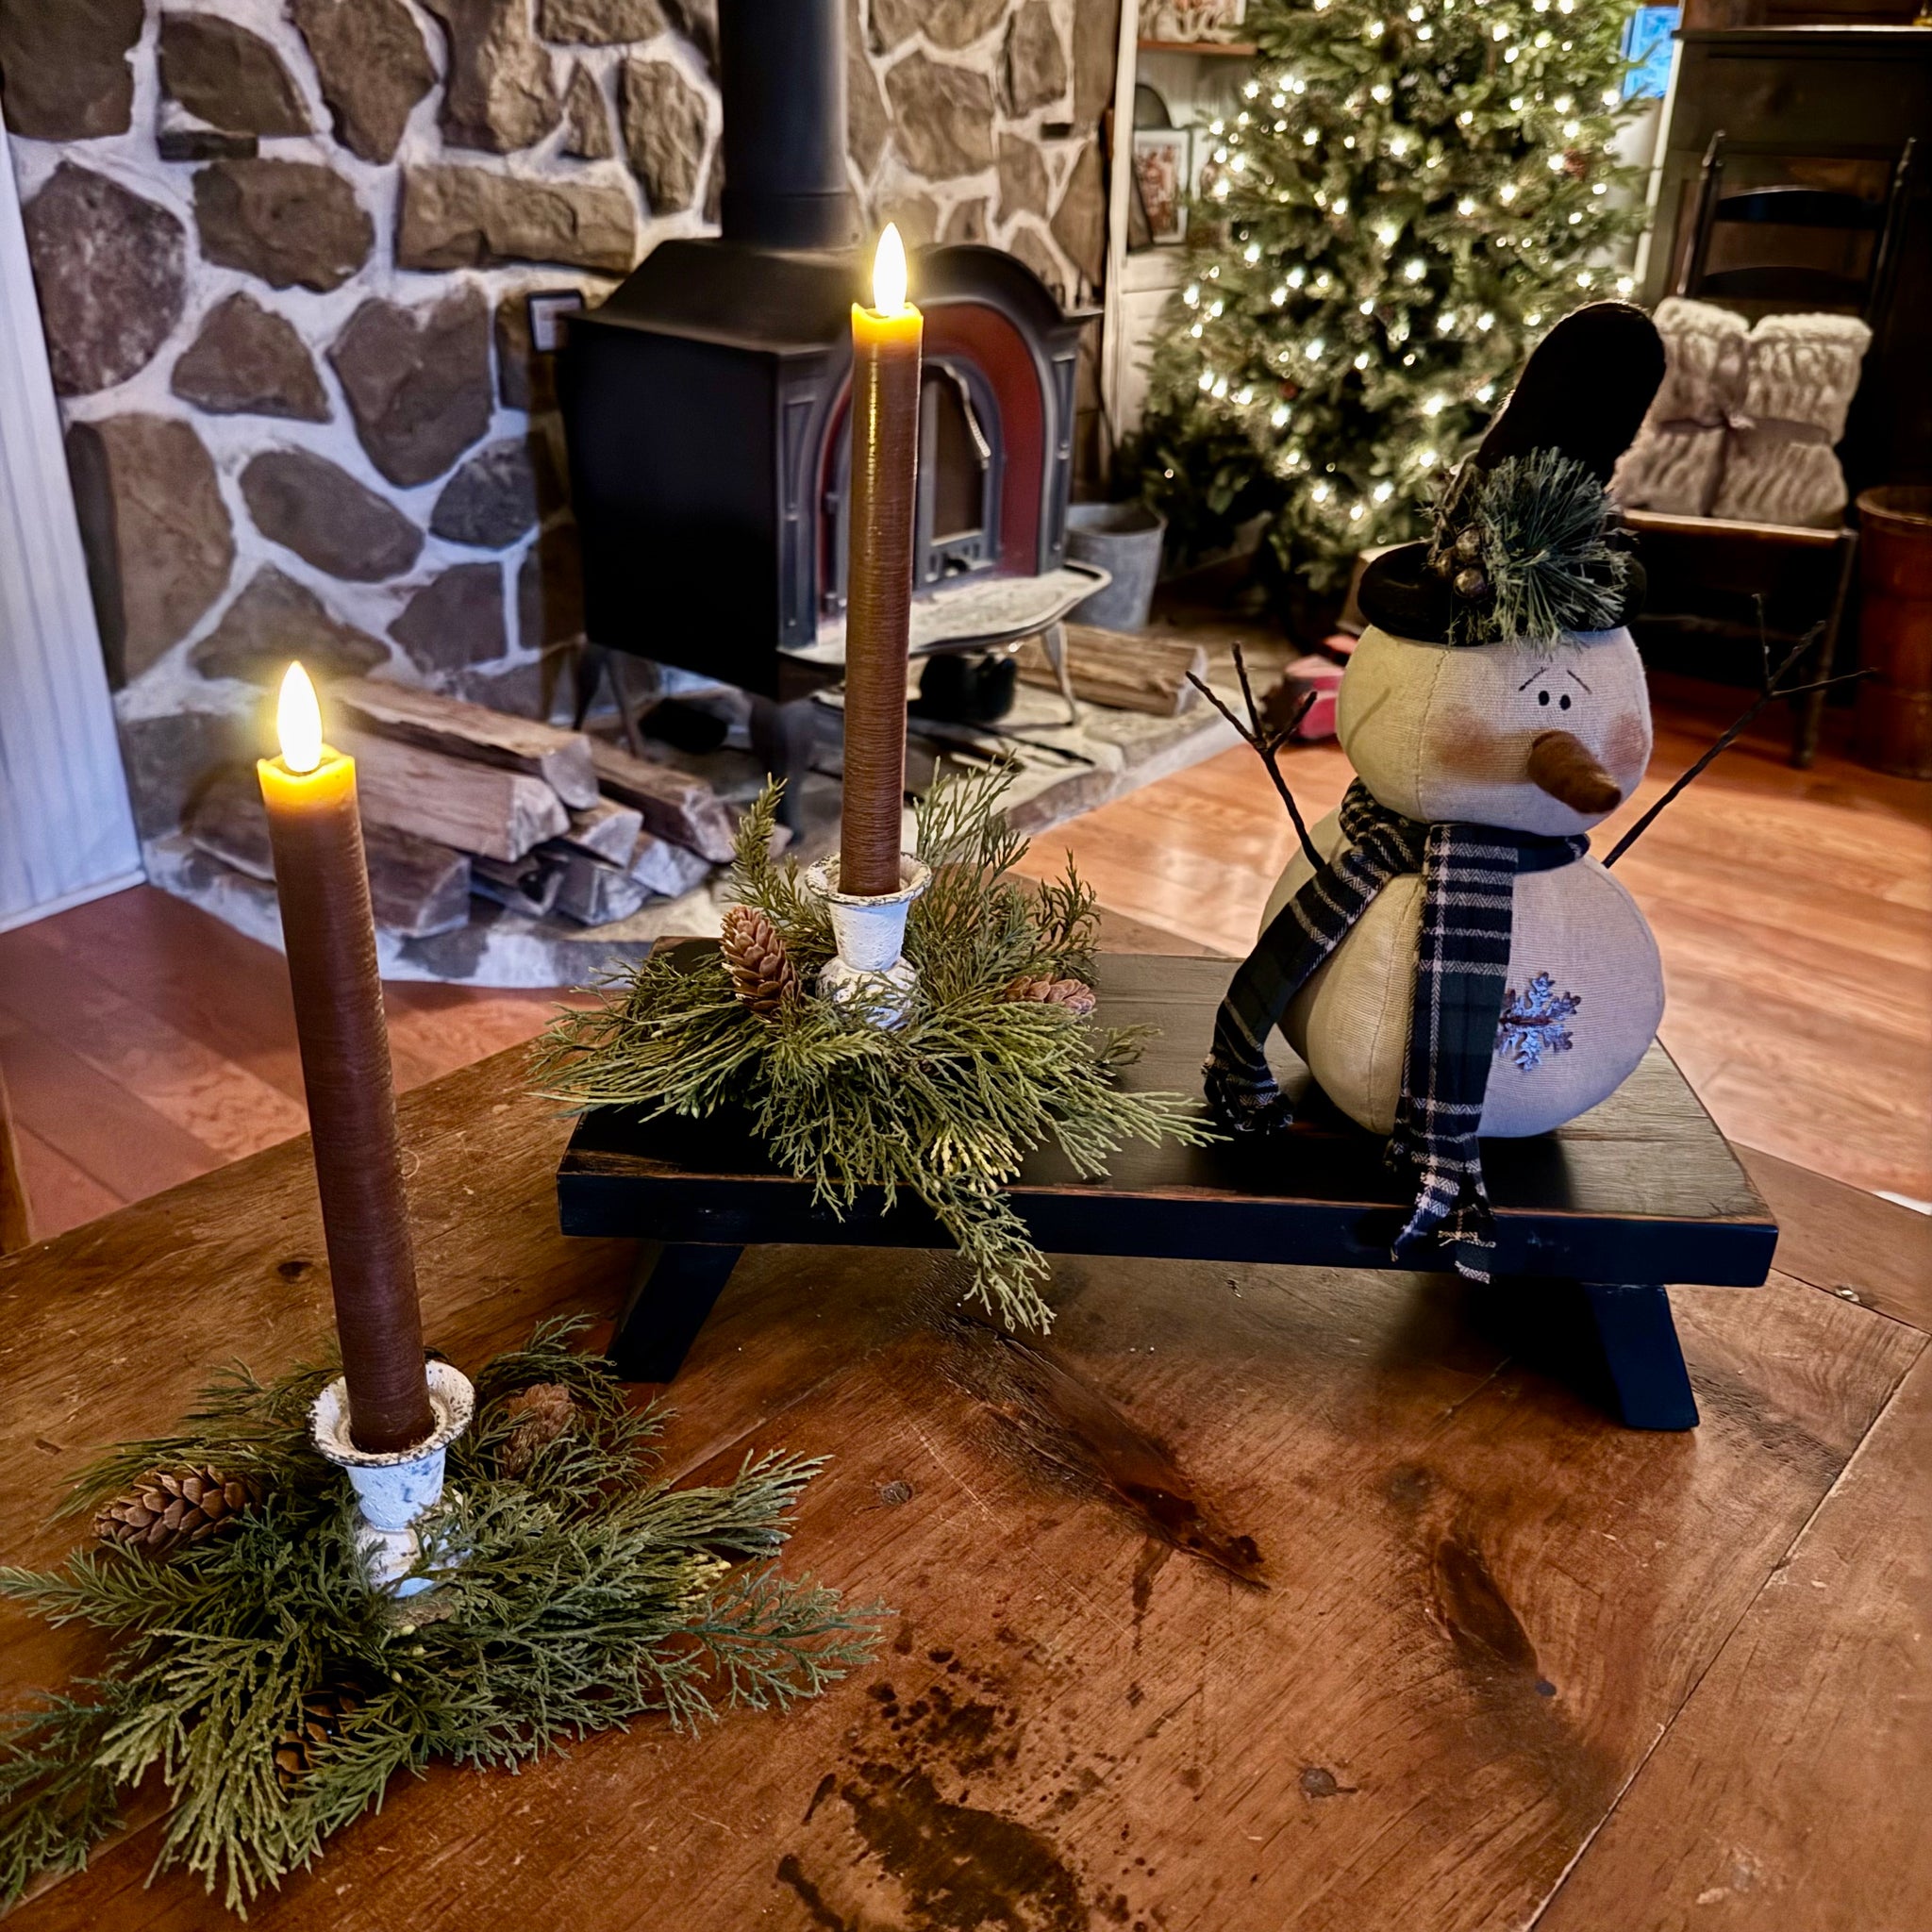 Black Wooden Table Riser - FREE Gift Included - Limited Time!